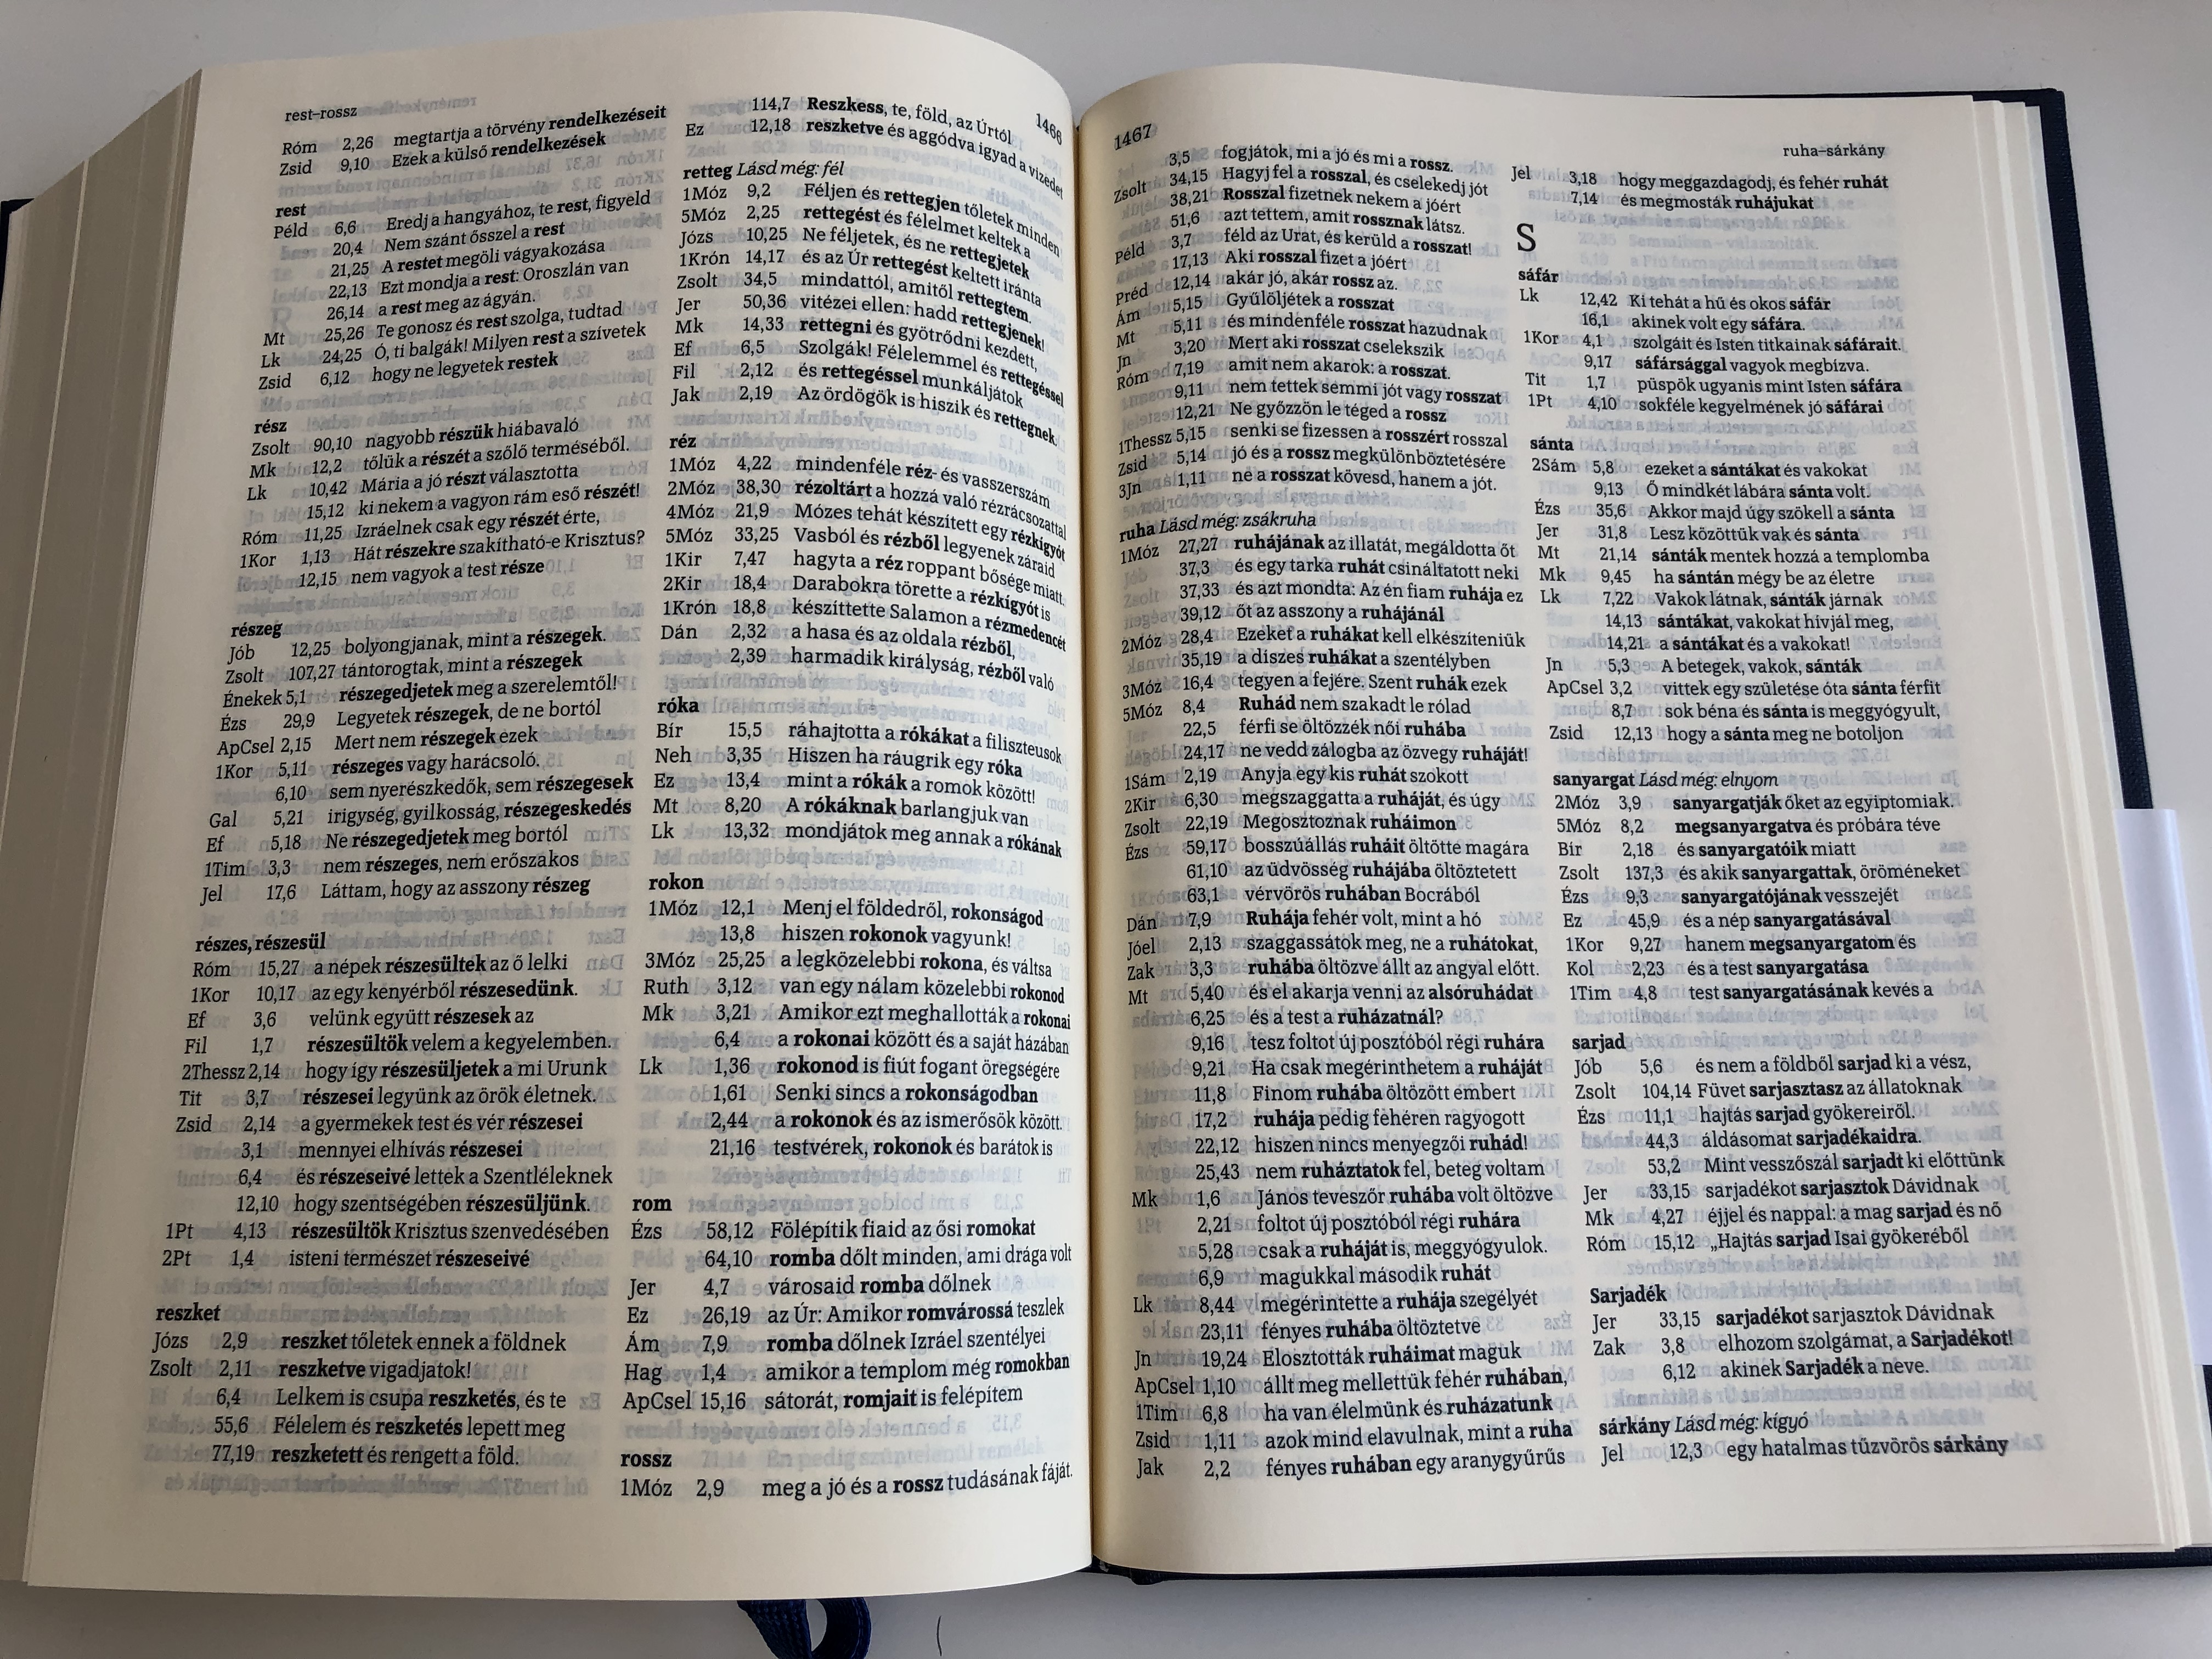 biblia-konkordanci-val-r-f-2014-hungarian-language-bible-with-concordance-published-on-the-500th-anniversary-of-the-reformation-hardcover-2017-color-maps-section-titles-mid-size-k-lvin-kiad-16-.jpg